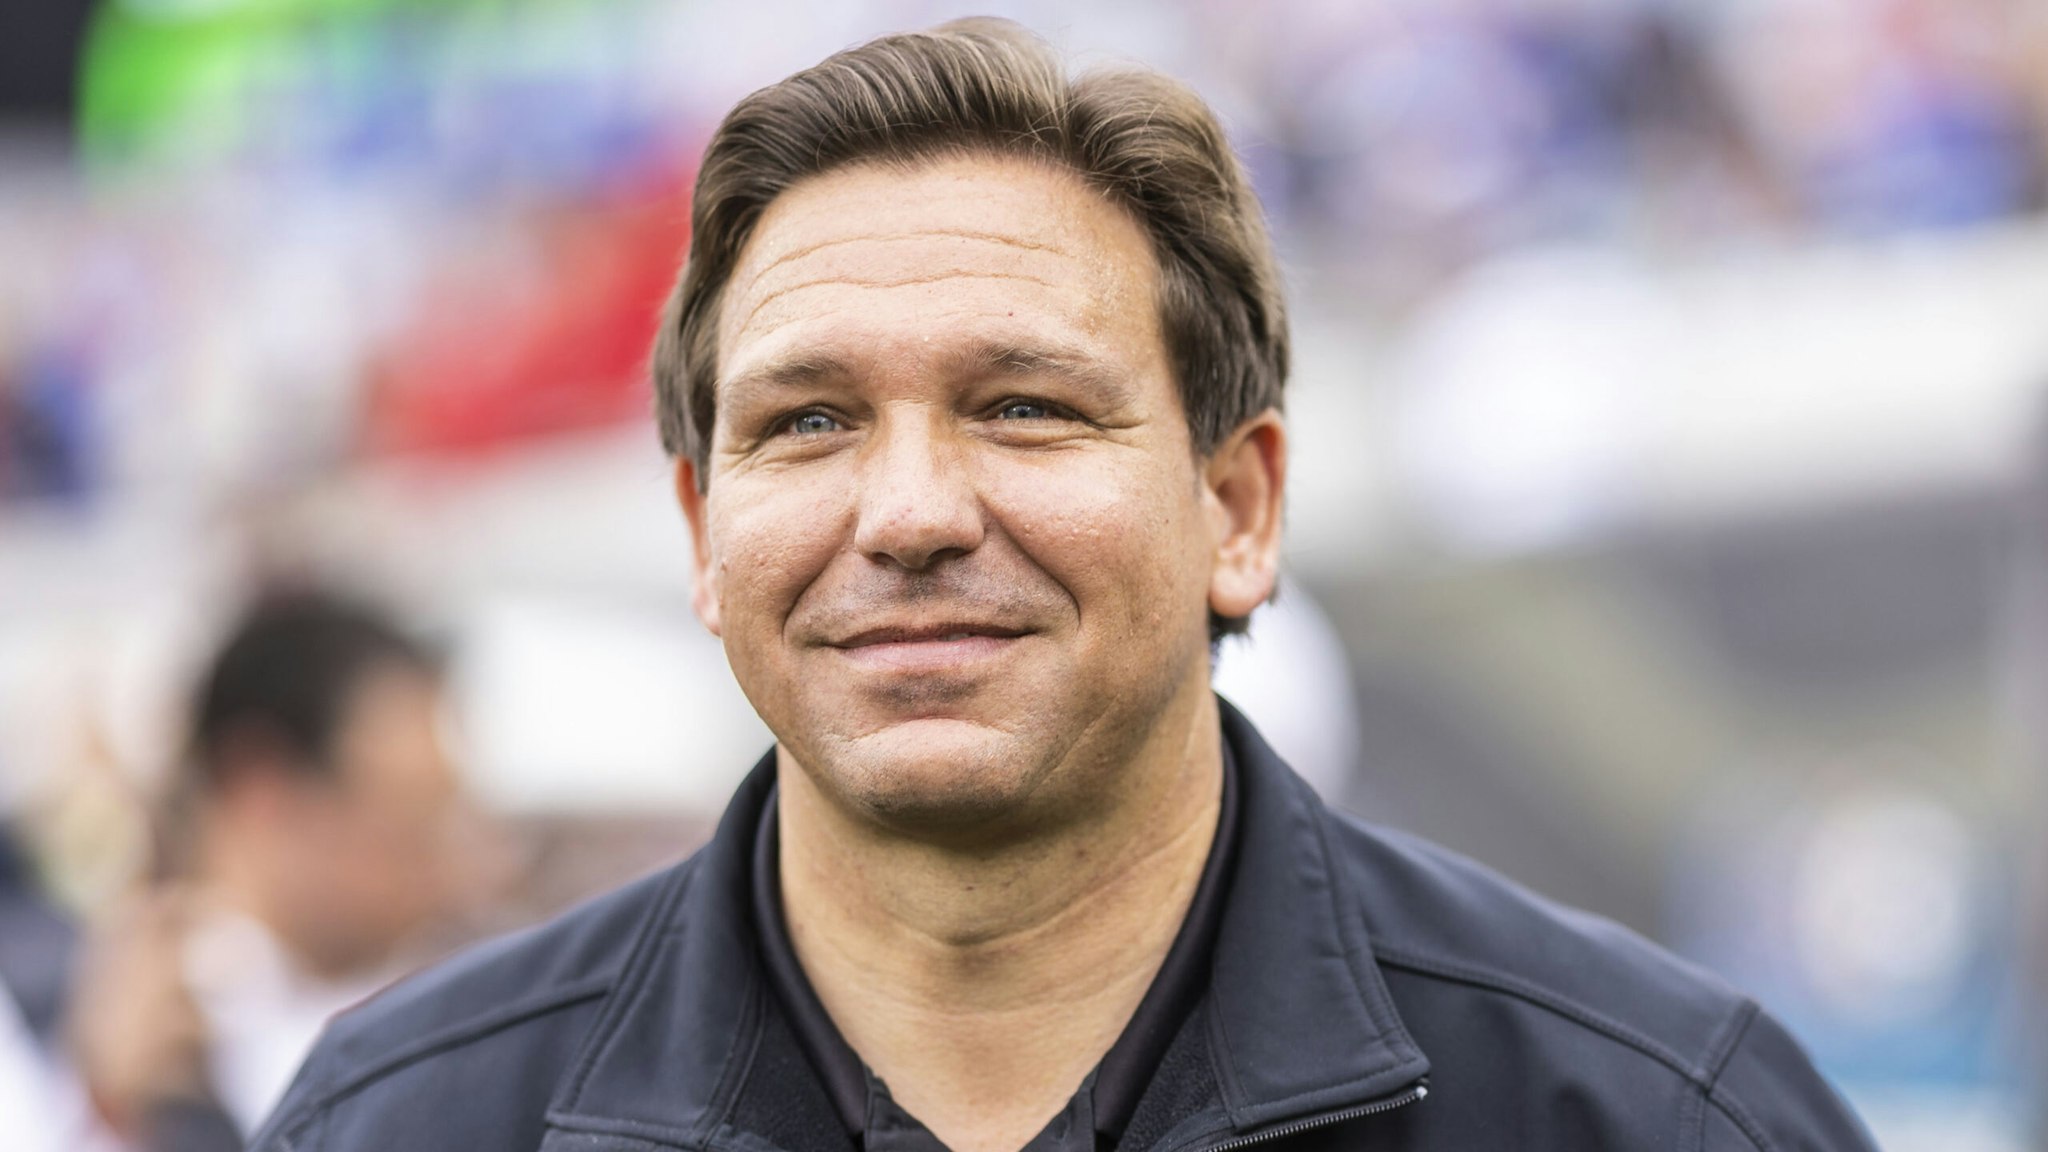 JACKSONVILLE, FLORIDA - OCTOBER 29: Florida Governor Ron DeSantis looks on before the start of a game between the Georgia Bulldogs and the Florida Gators at TIAA Bank Field on October 29, 2022 in Jacksonville, Florida.